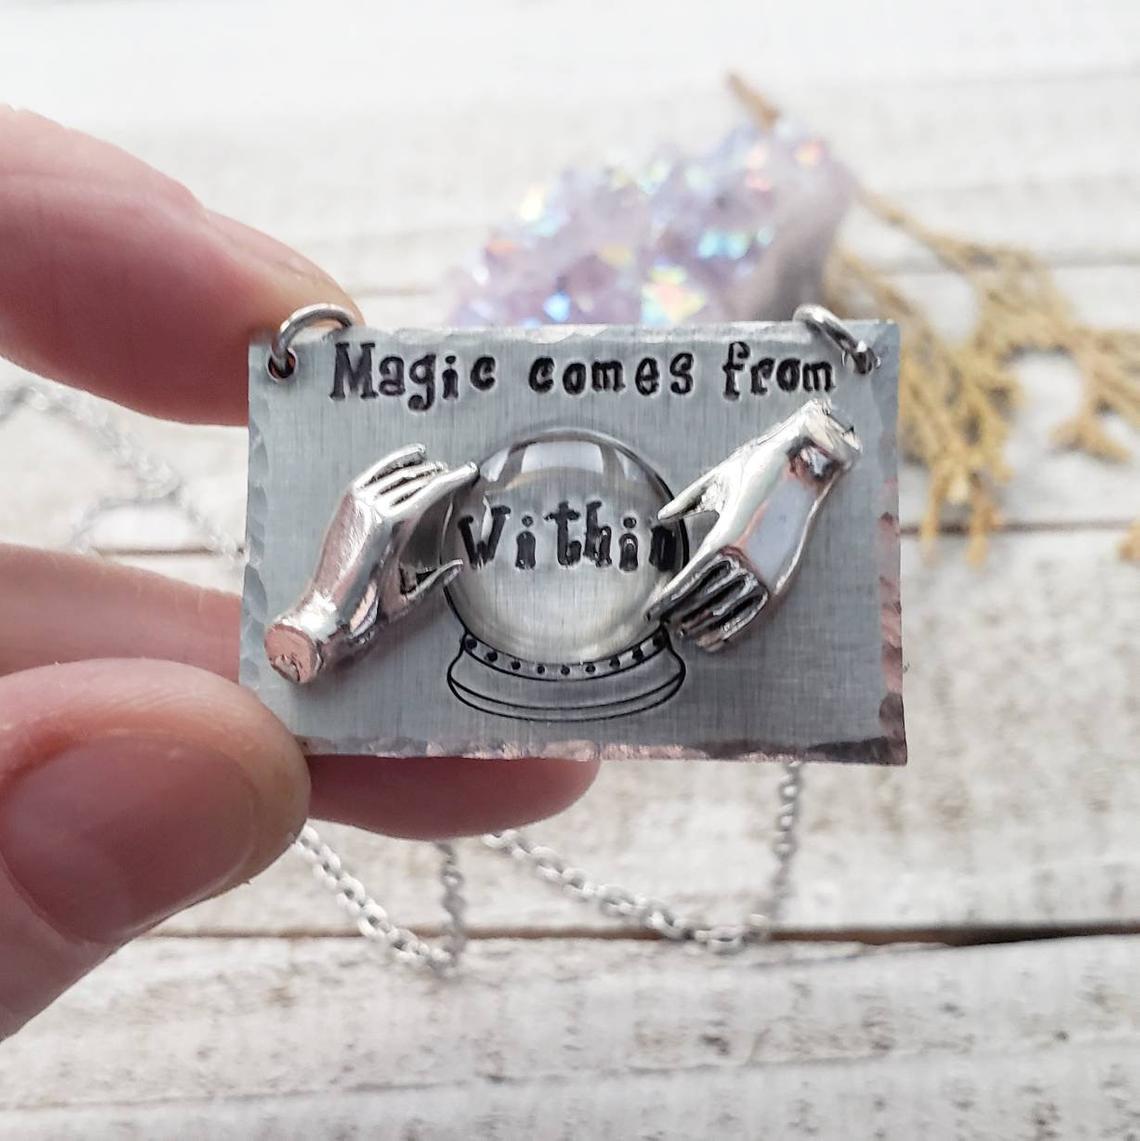 Crystal ball fortune teller necklace